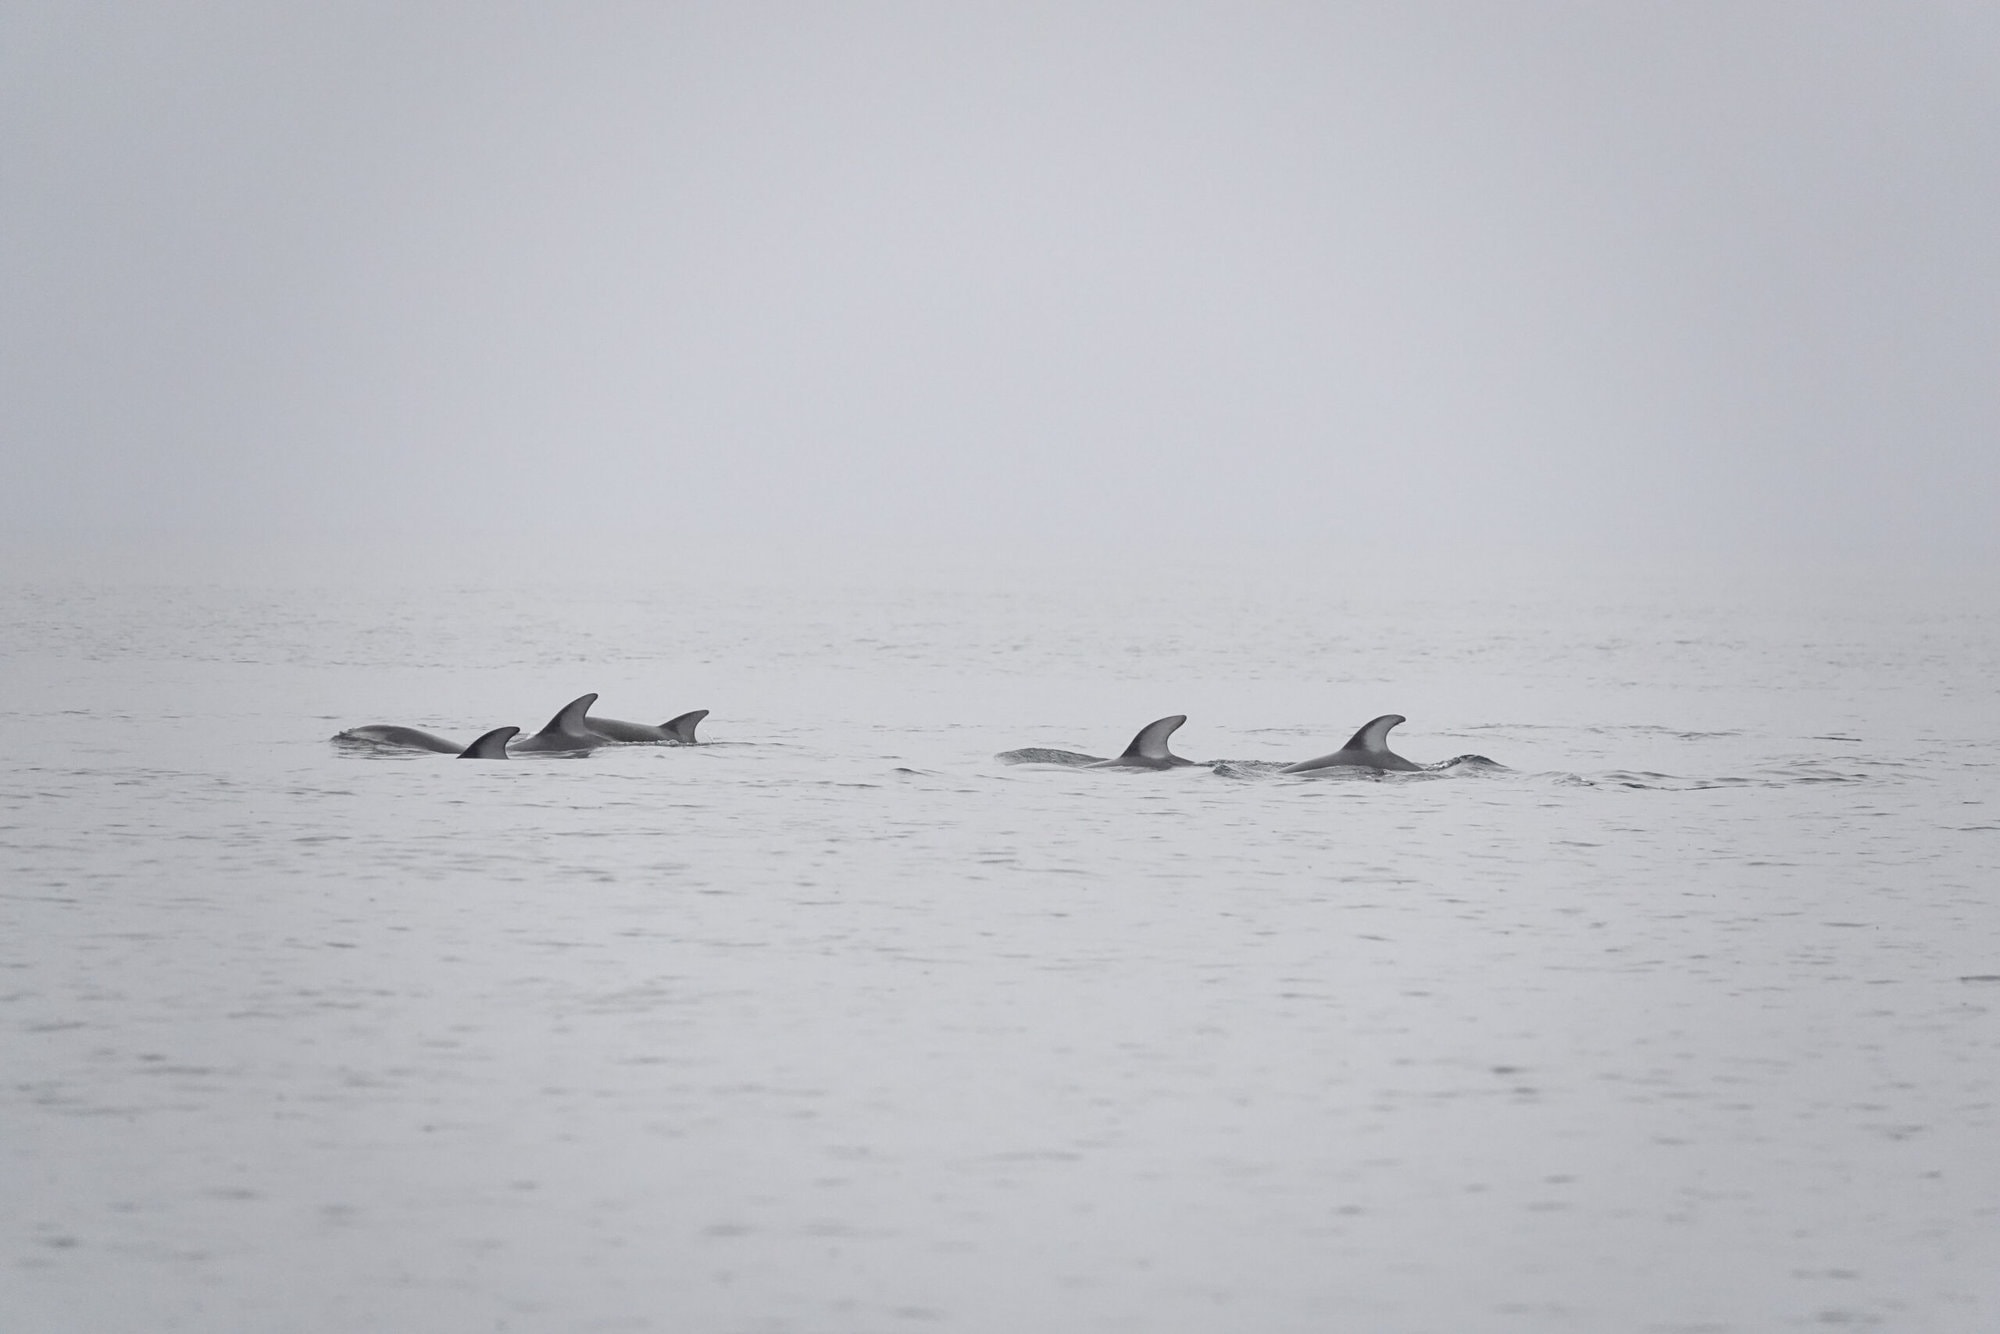 Pacific White Sided Dolphins emerging from water in the fog